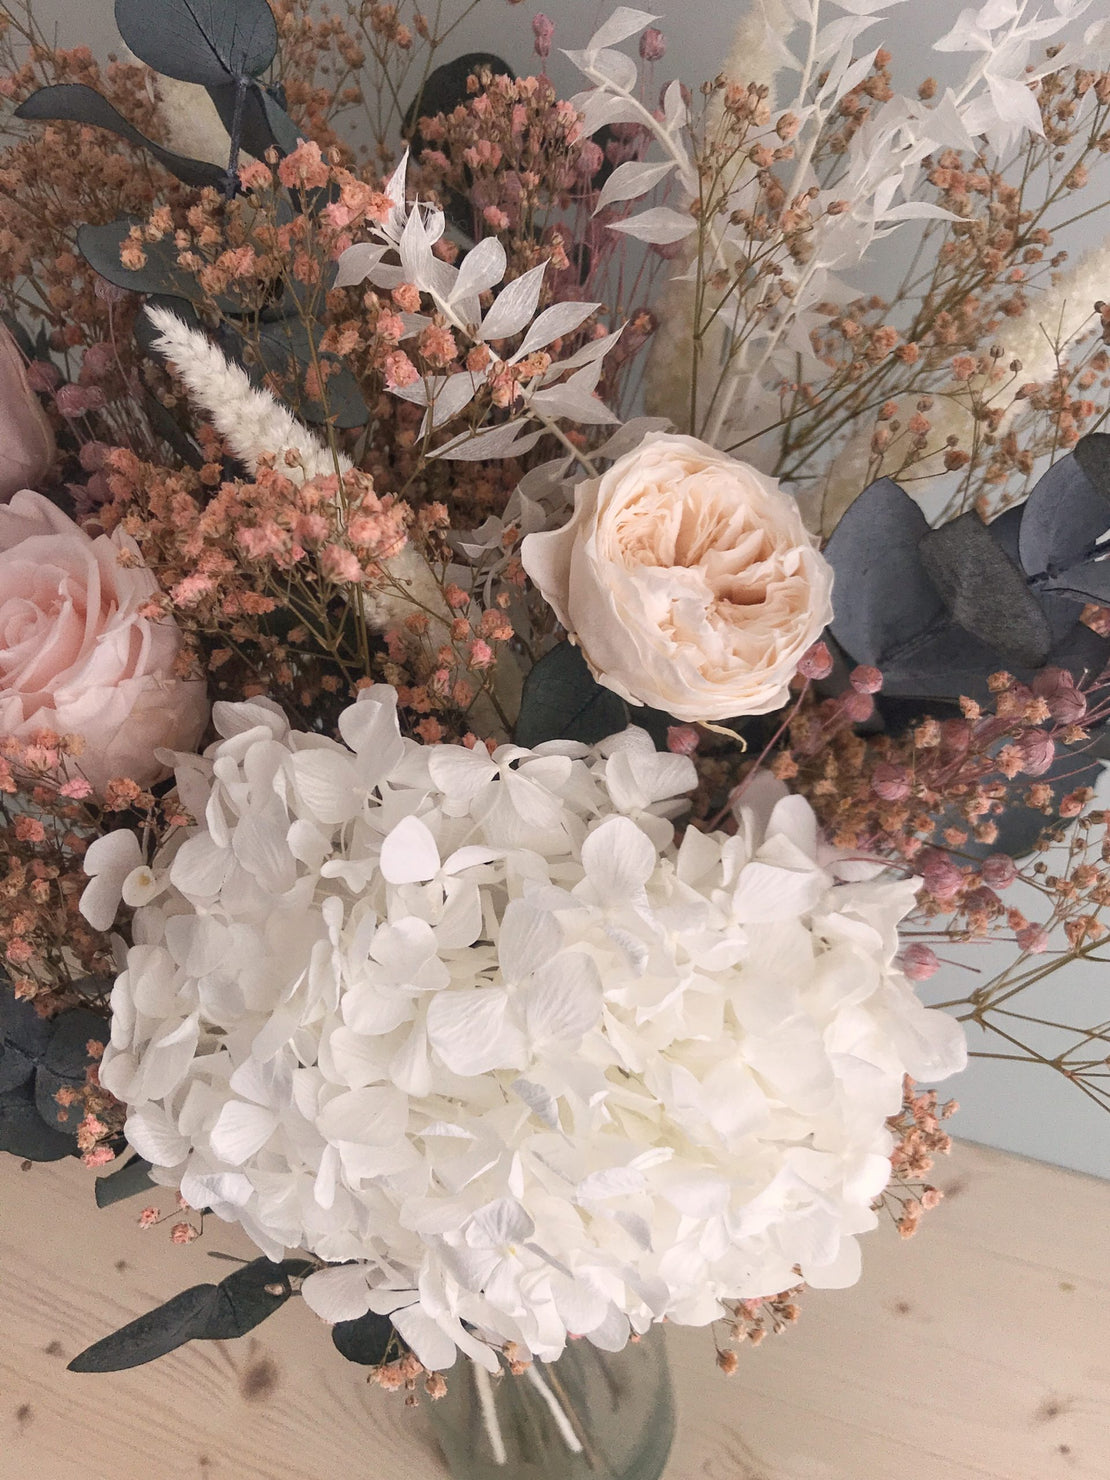 Large bouquet of dried and stabilized flowers with roses, hydrangea, gypsophila, eucalyptus - Bouquet Gloria